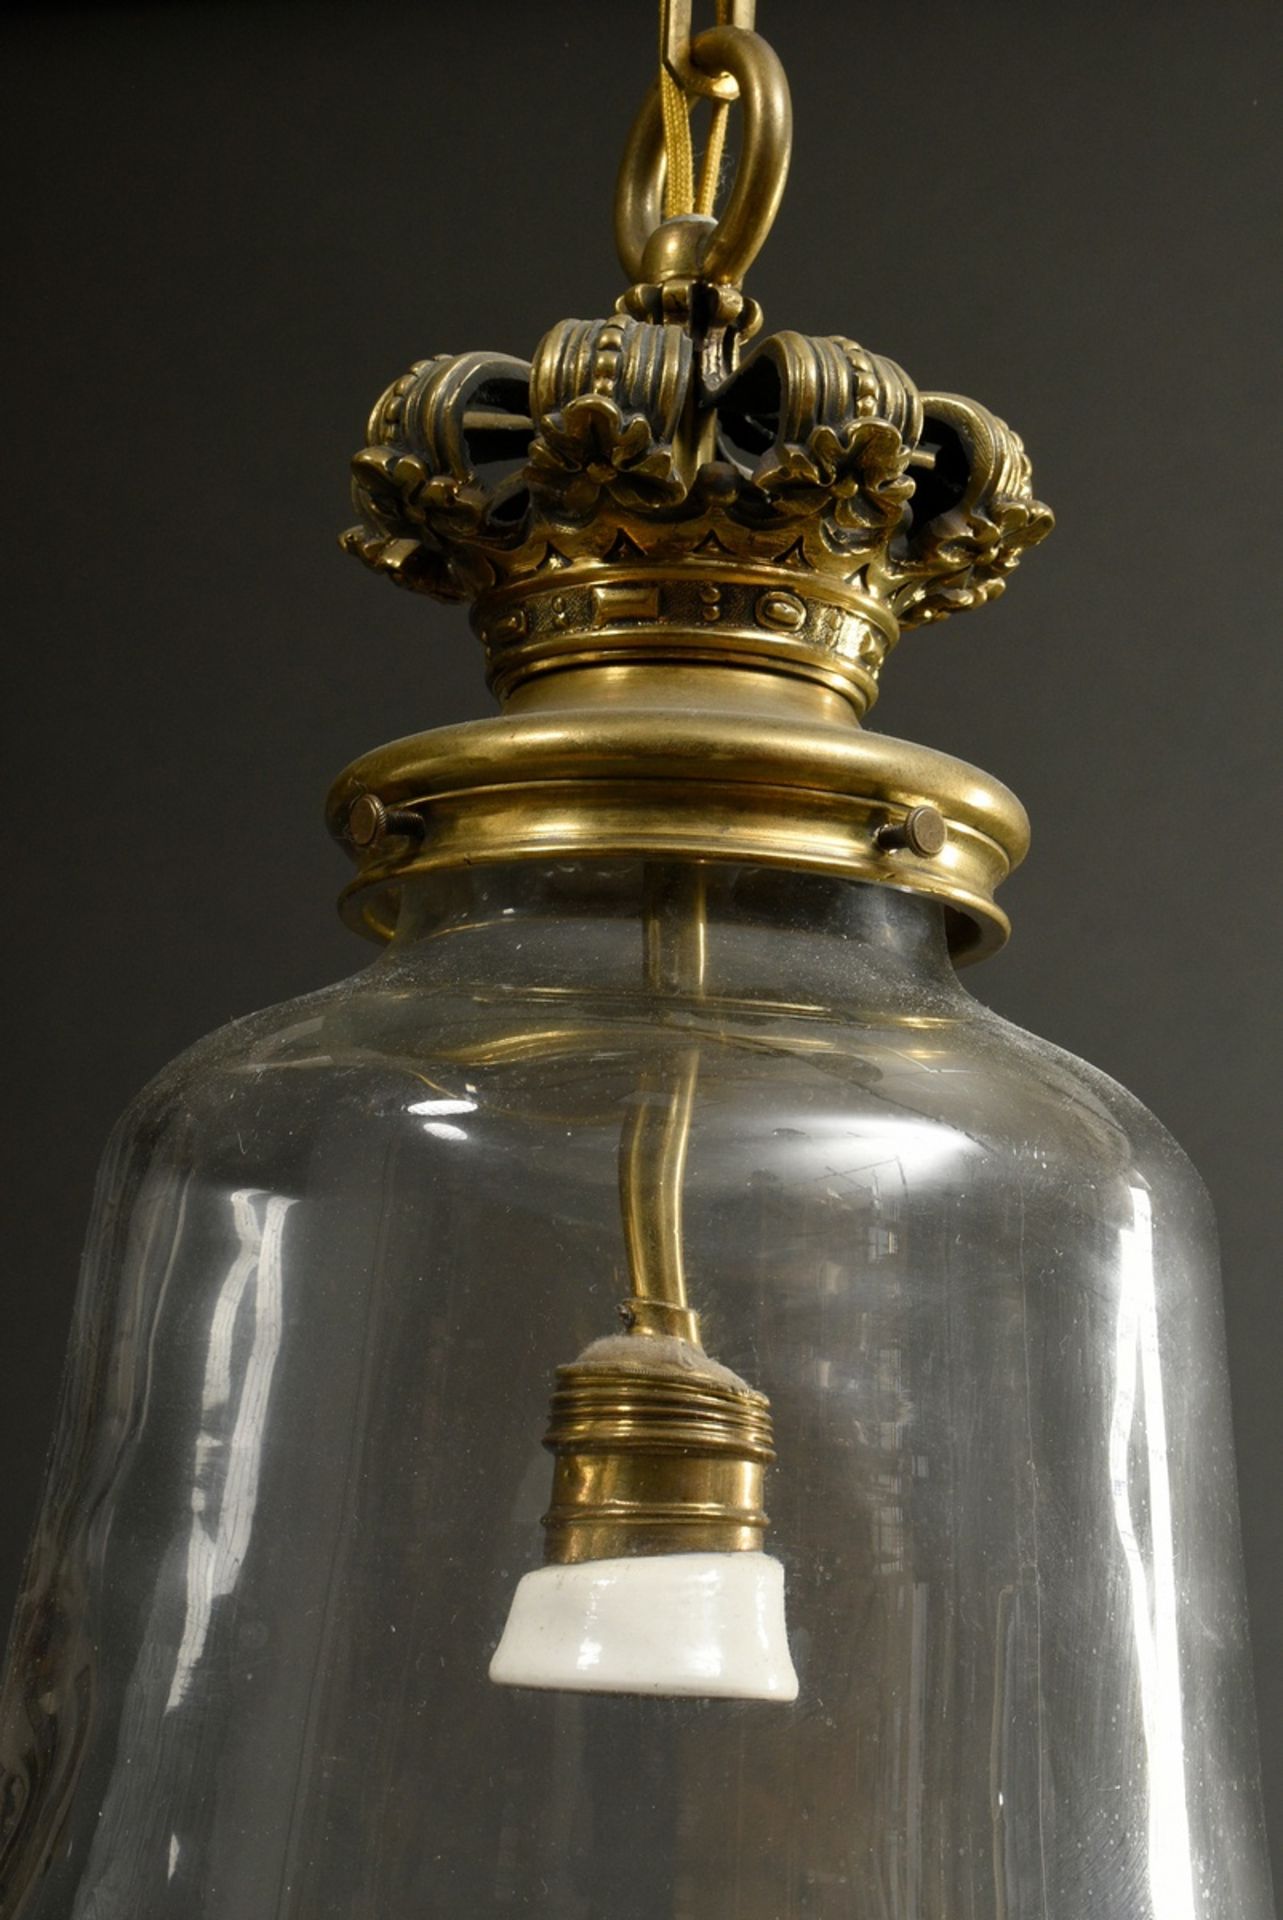 Ceiling lamp with bell-shaped glass dome and brass "crowns" mount, 20th c., electrified, h. 48cm - Image 2 of 3